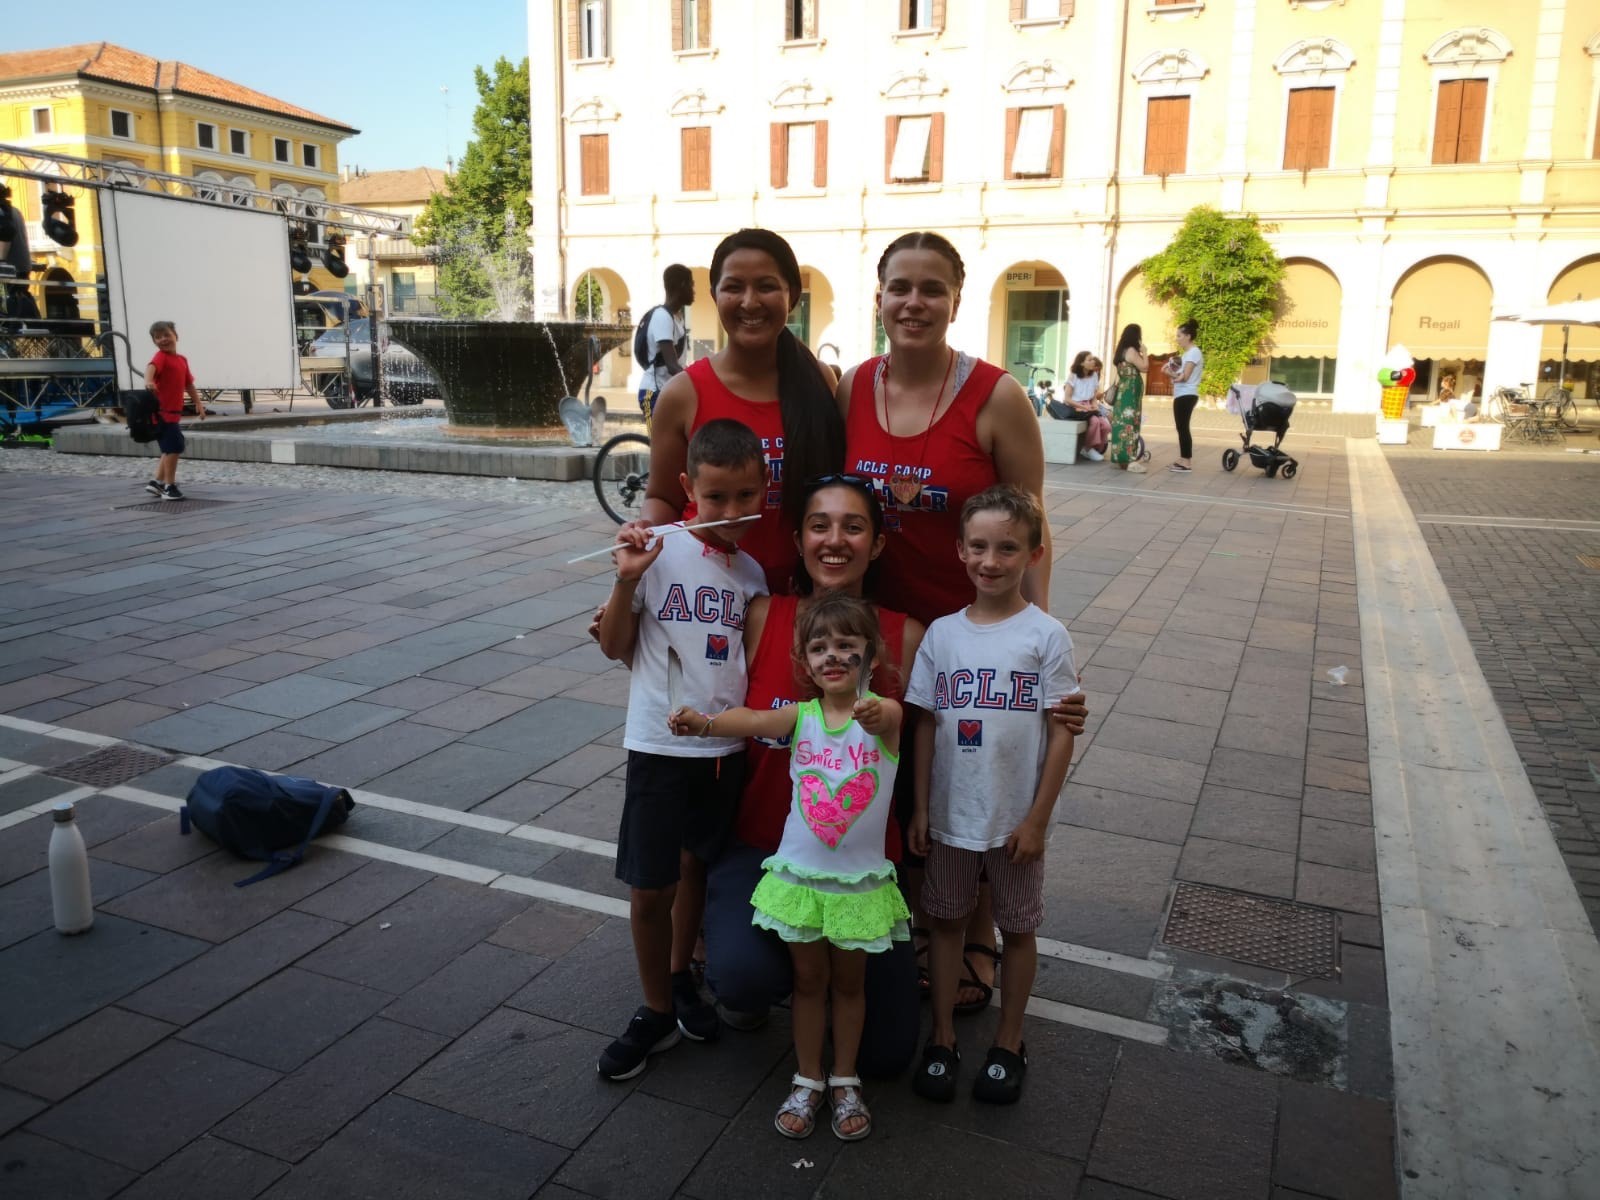 Three young women in red camp counselor uniforms pose with three young campers in Venice.